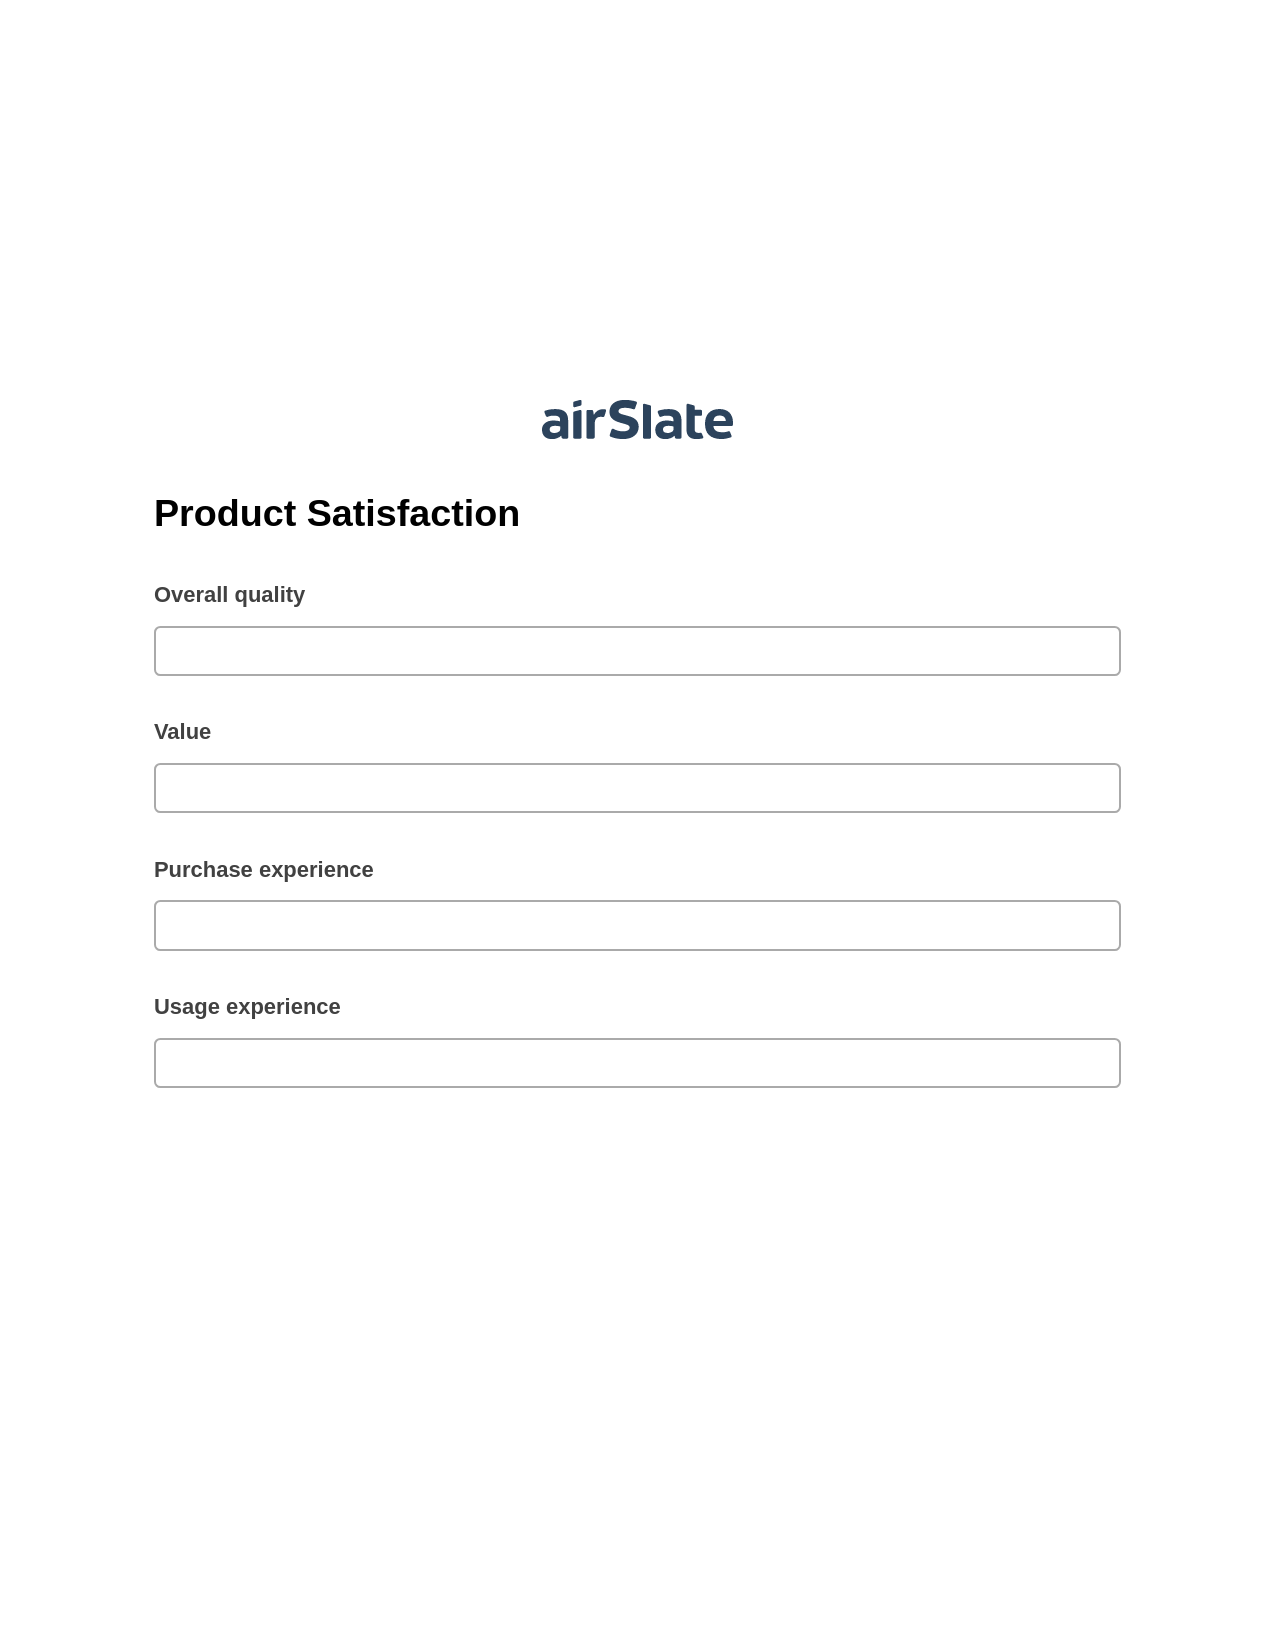 Multirole Product Satisfaction Pre-fill Slate from MS Dynamics 365 Records Bot, Send a Slate with Roles Bot, Archive to SharePoint Folder Bot